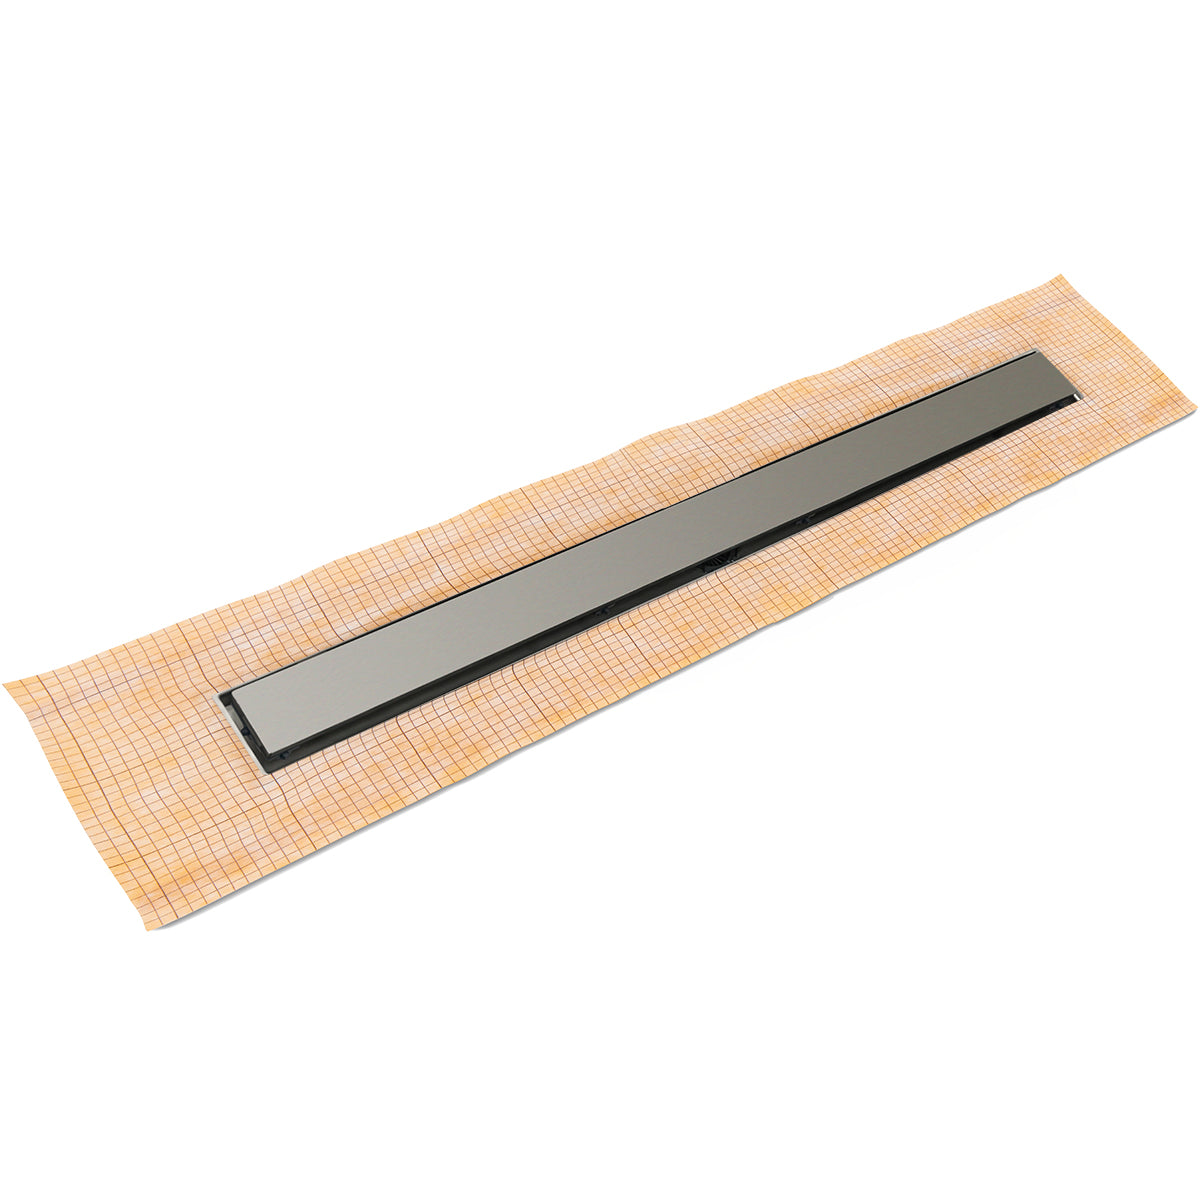 Infinity Drain 48" FCS Series Schluter-Kerdi - Fixed Flange Linear Drain Kit with 2 1/2" Solid Grate